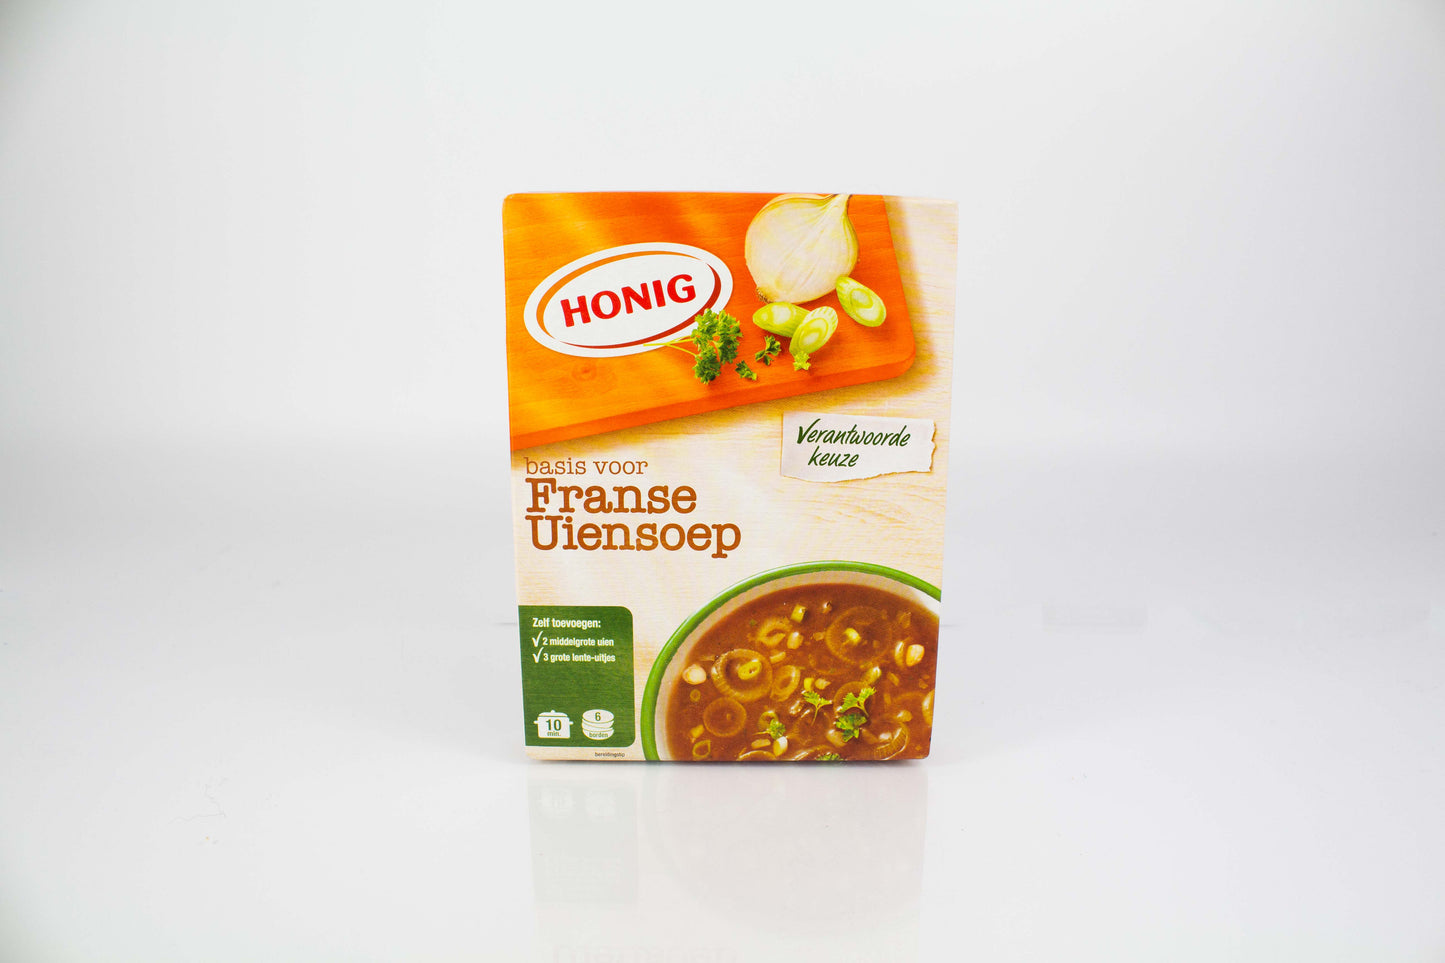 Honig French Union Soup